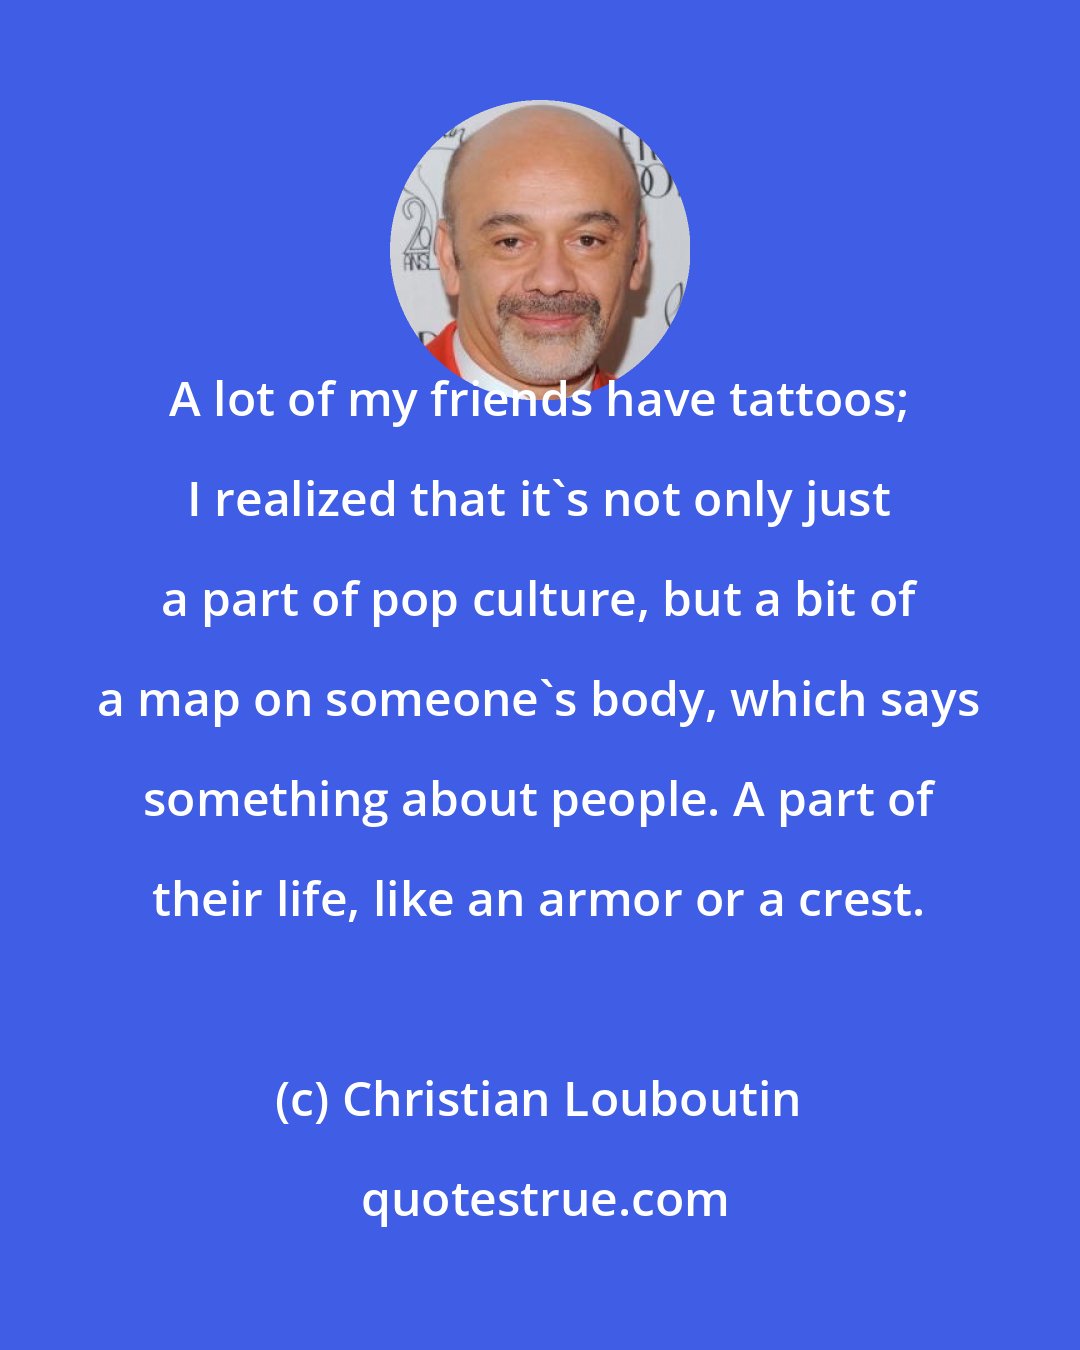 Christian Louboutin: A lot of my friends have tattoos; I realized that it's not only just a part of pop culture, but a bit of a map on someone's body, which says something about people. A part of their life, like an armor or a crest.